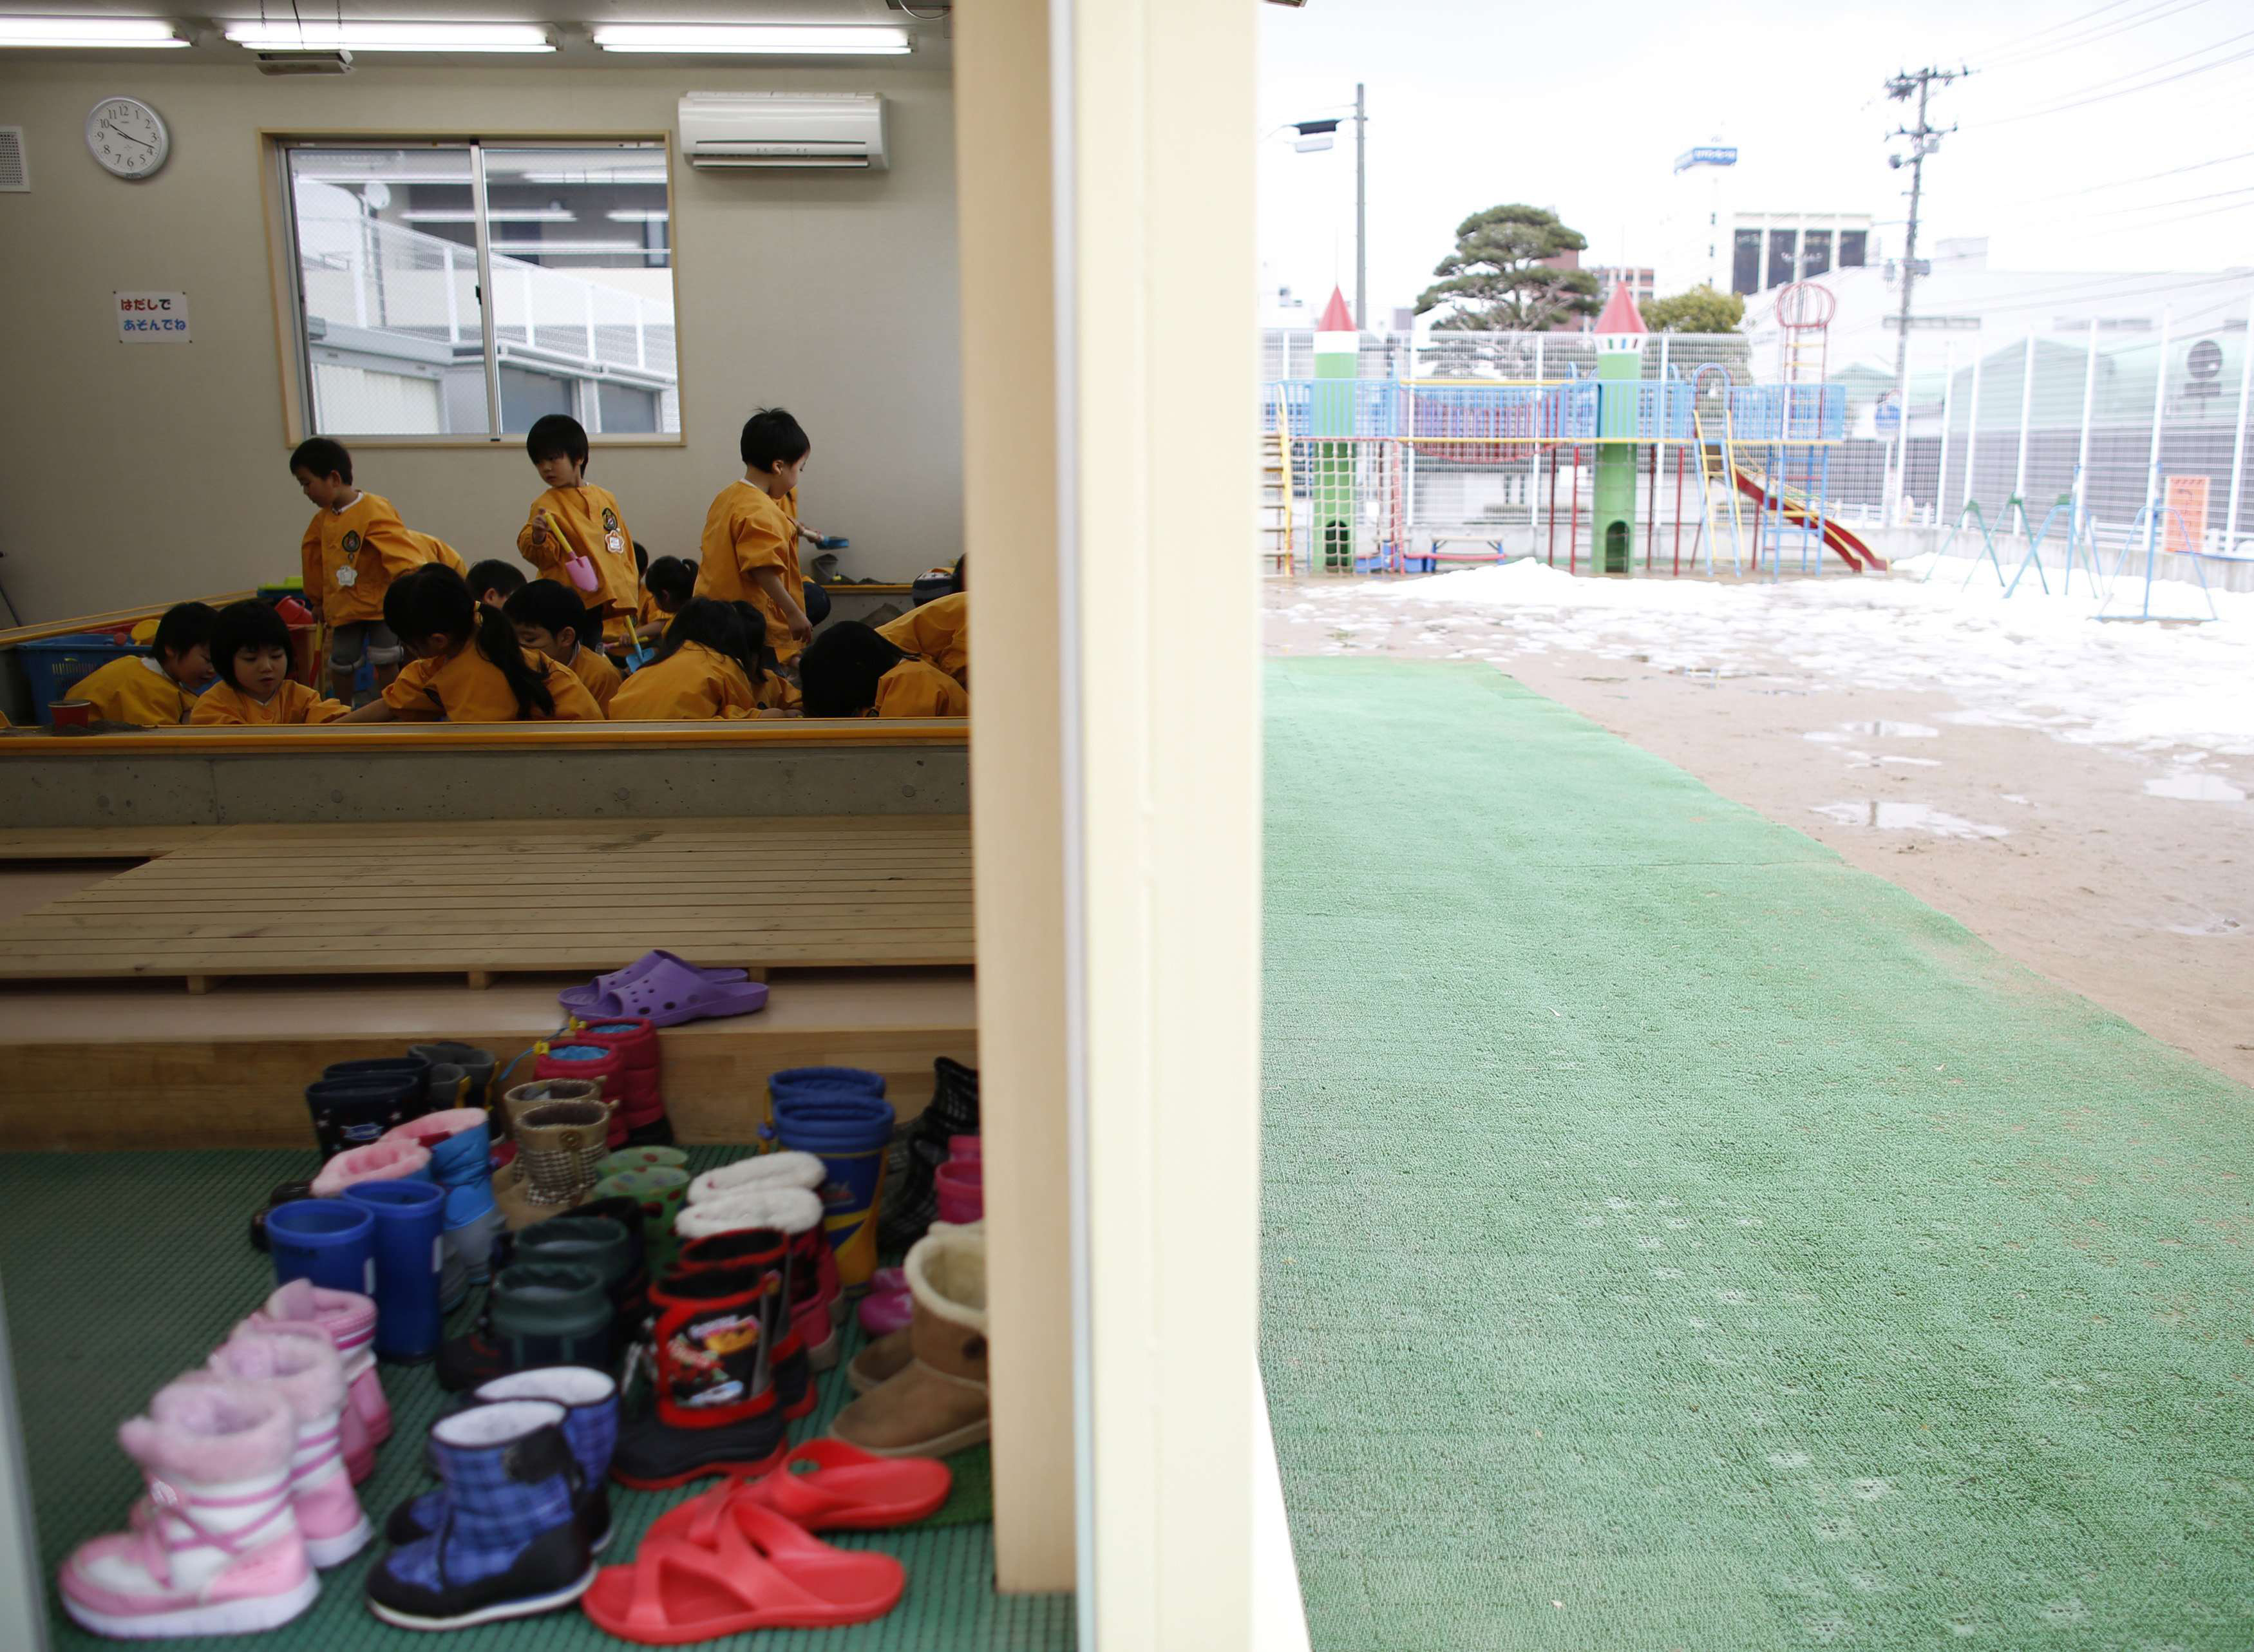 Playing it safe: Children play in an indoor sand pit at a kindergarten in Koriyama, about 50 km from the Fukushima No. 1 nuclear plant. The city recommended that children aged 3 to 5 limit their time outdoors to 30 minutes per day in the wake of the 2011 nuclear disaster. The limits were lifted in 2013, but many of the region's kindergartens continue to adhere to them because of parents' concerns. | REUTERS